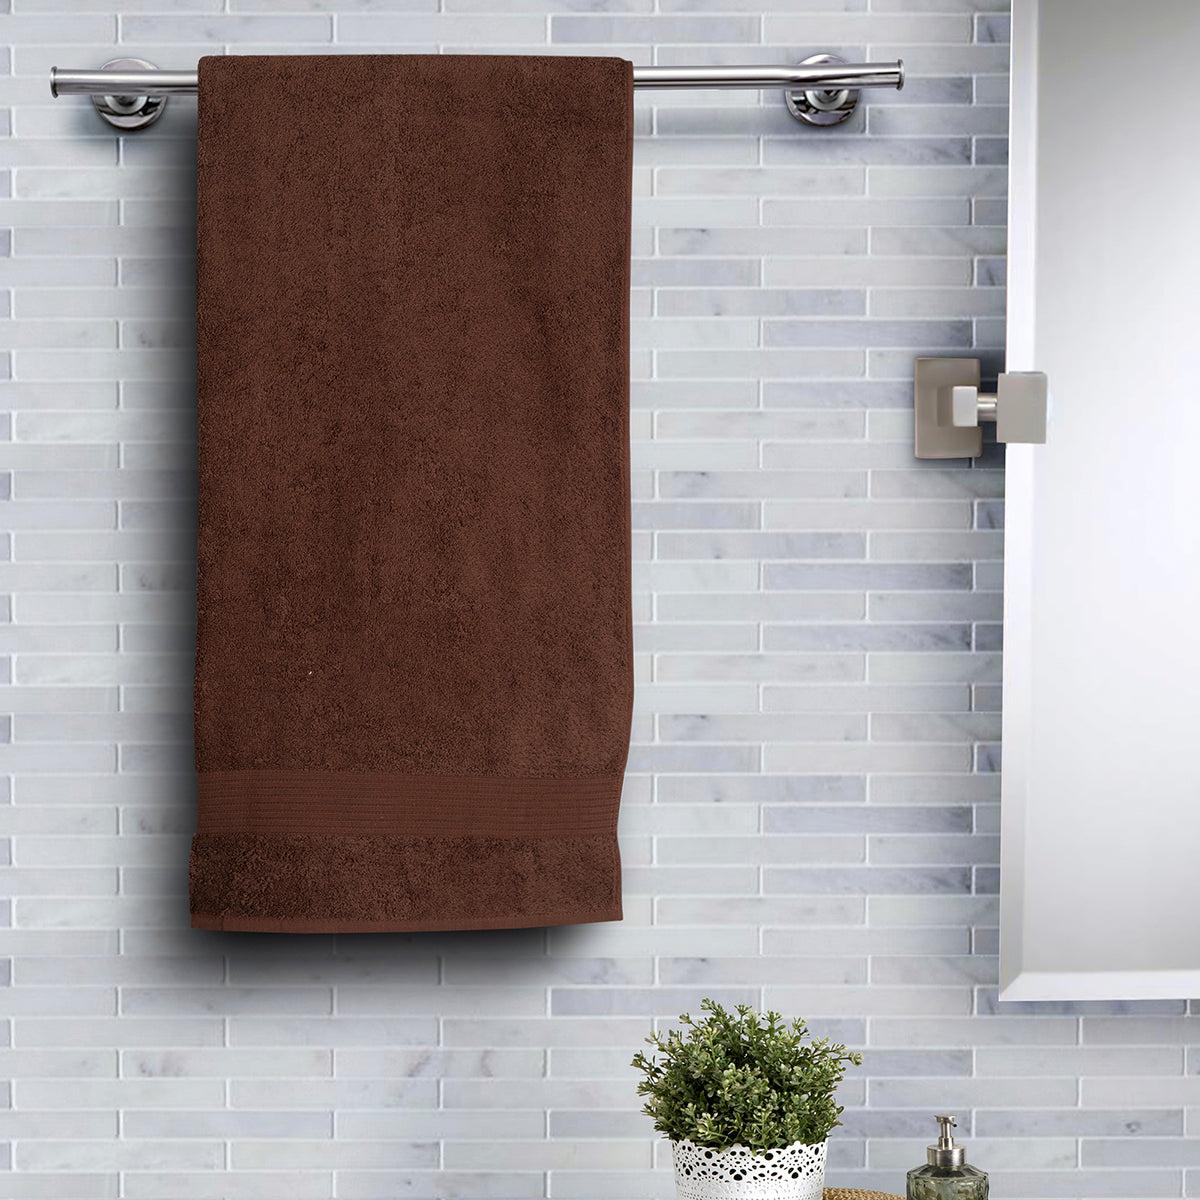 Jeneth Ultra-Soft and Highly Absorbent Cocoa Brown Bath Towel